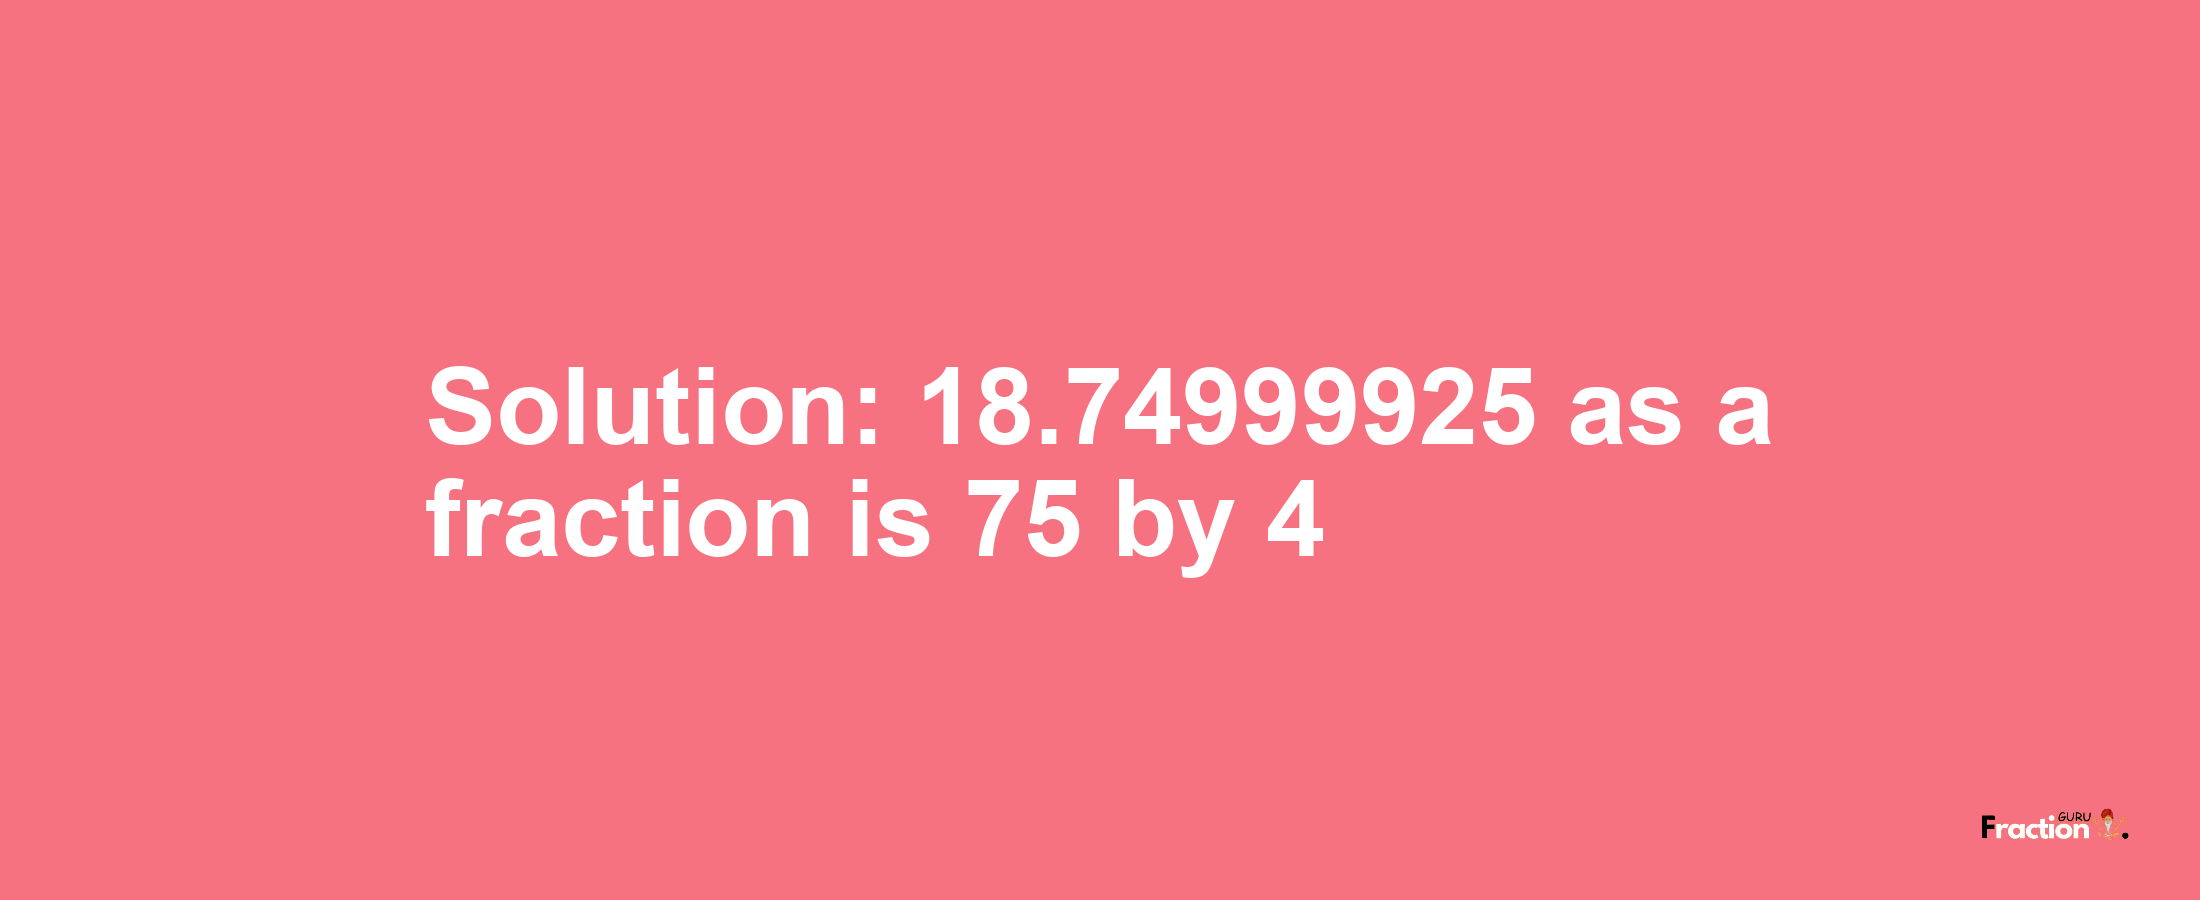 Solution:18.74999925 as a fraction is 75/4